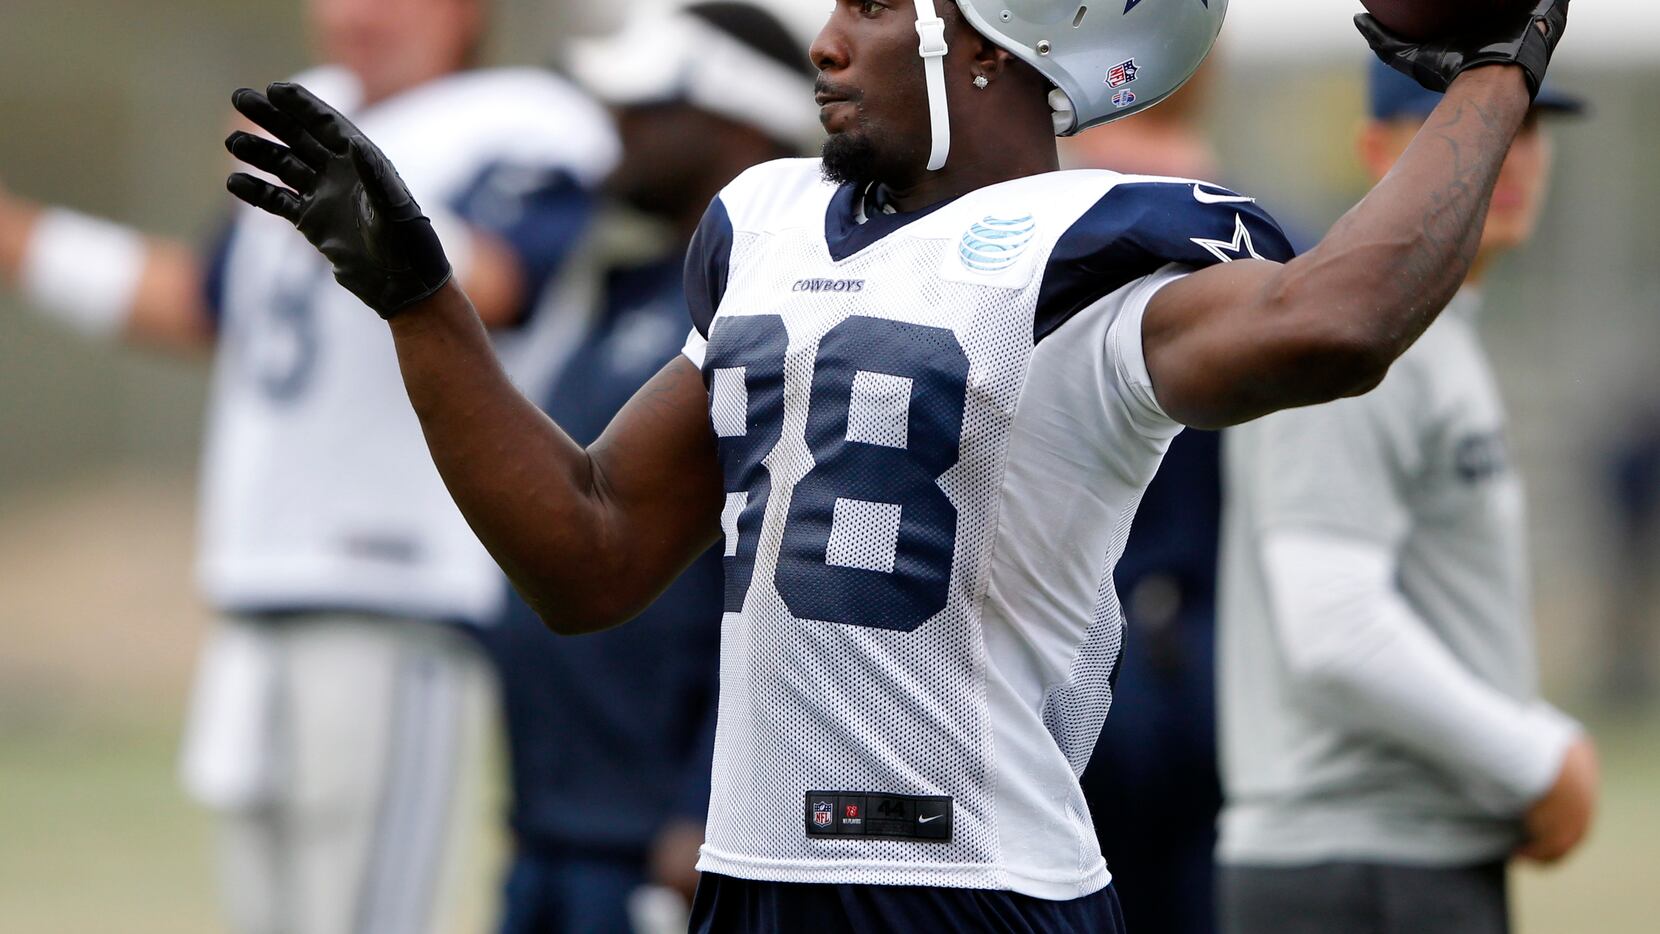 Dez Bryant offers his solution in the LeBron James cramp conversation